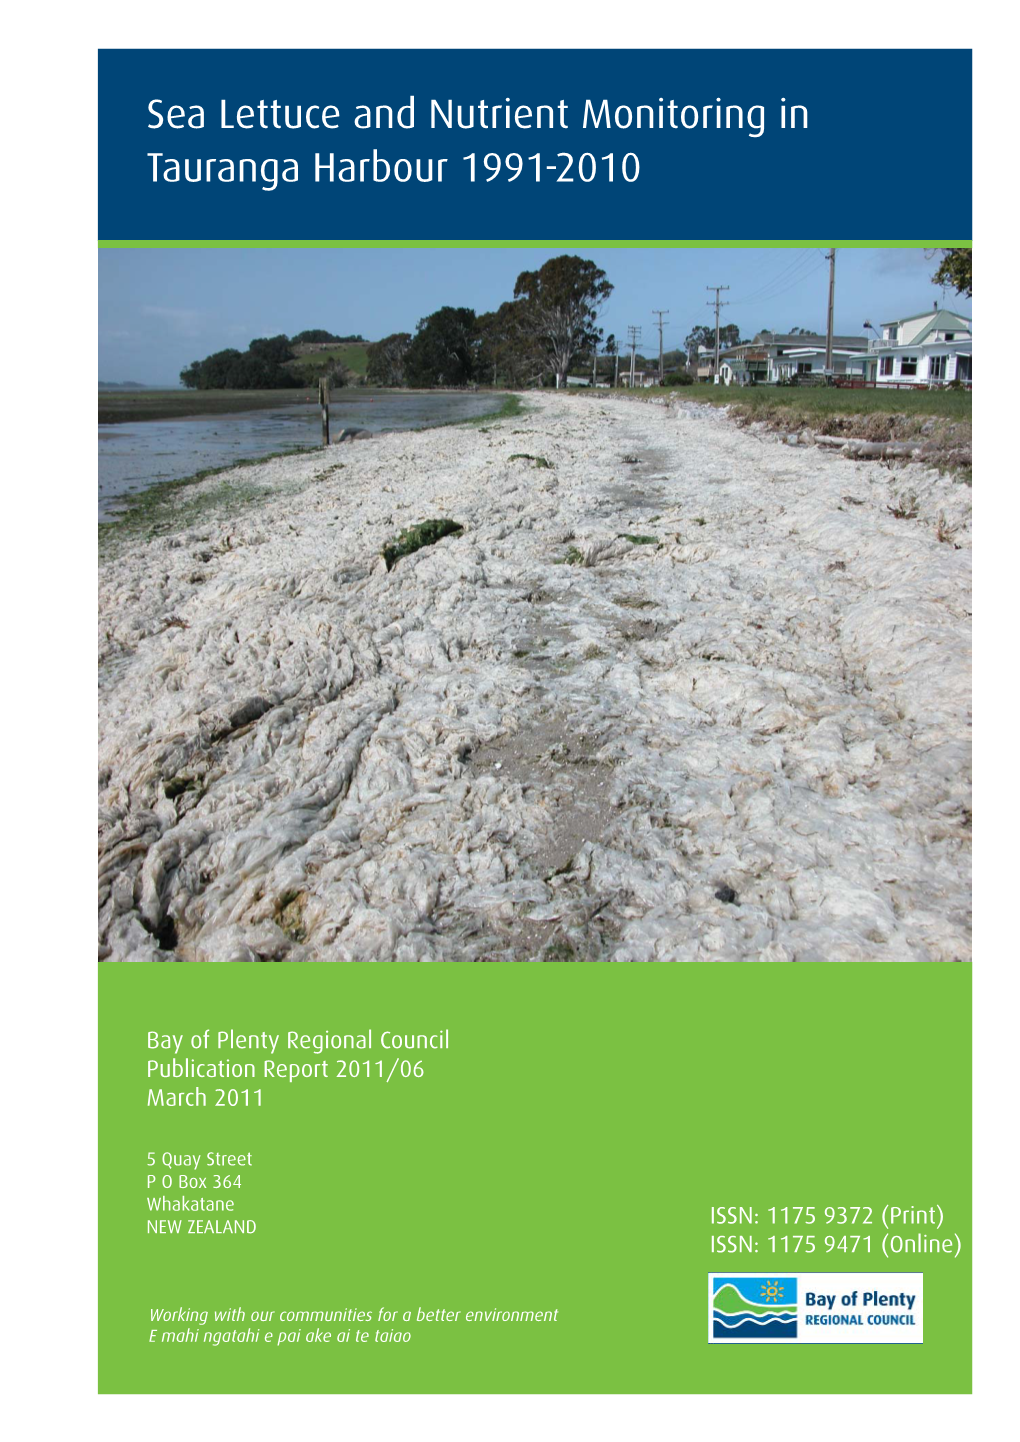 Sea Lettuce and Nutrient Monitoring in Tauranga Harbour 1991-2010